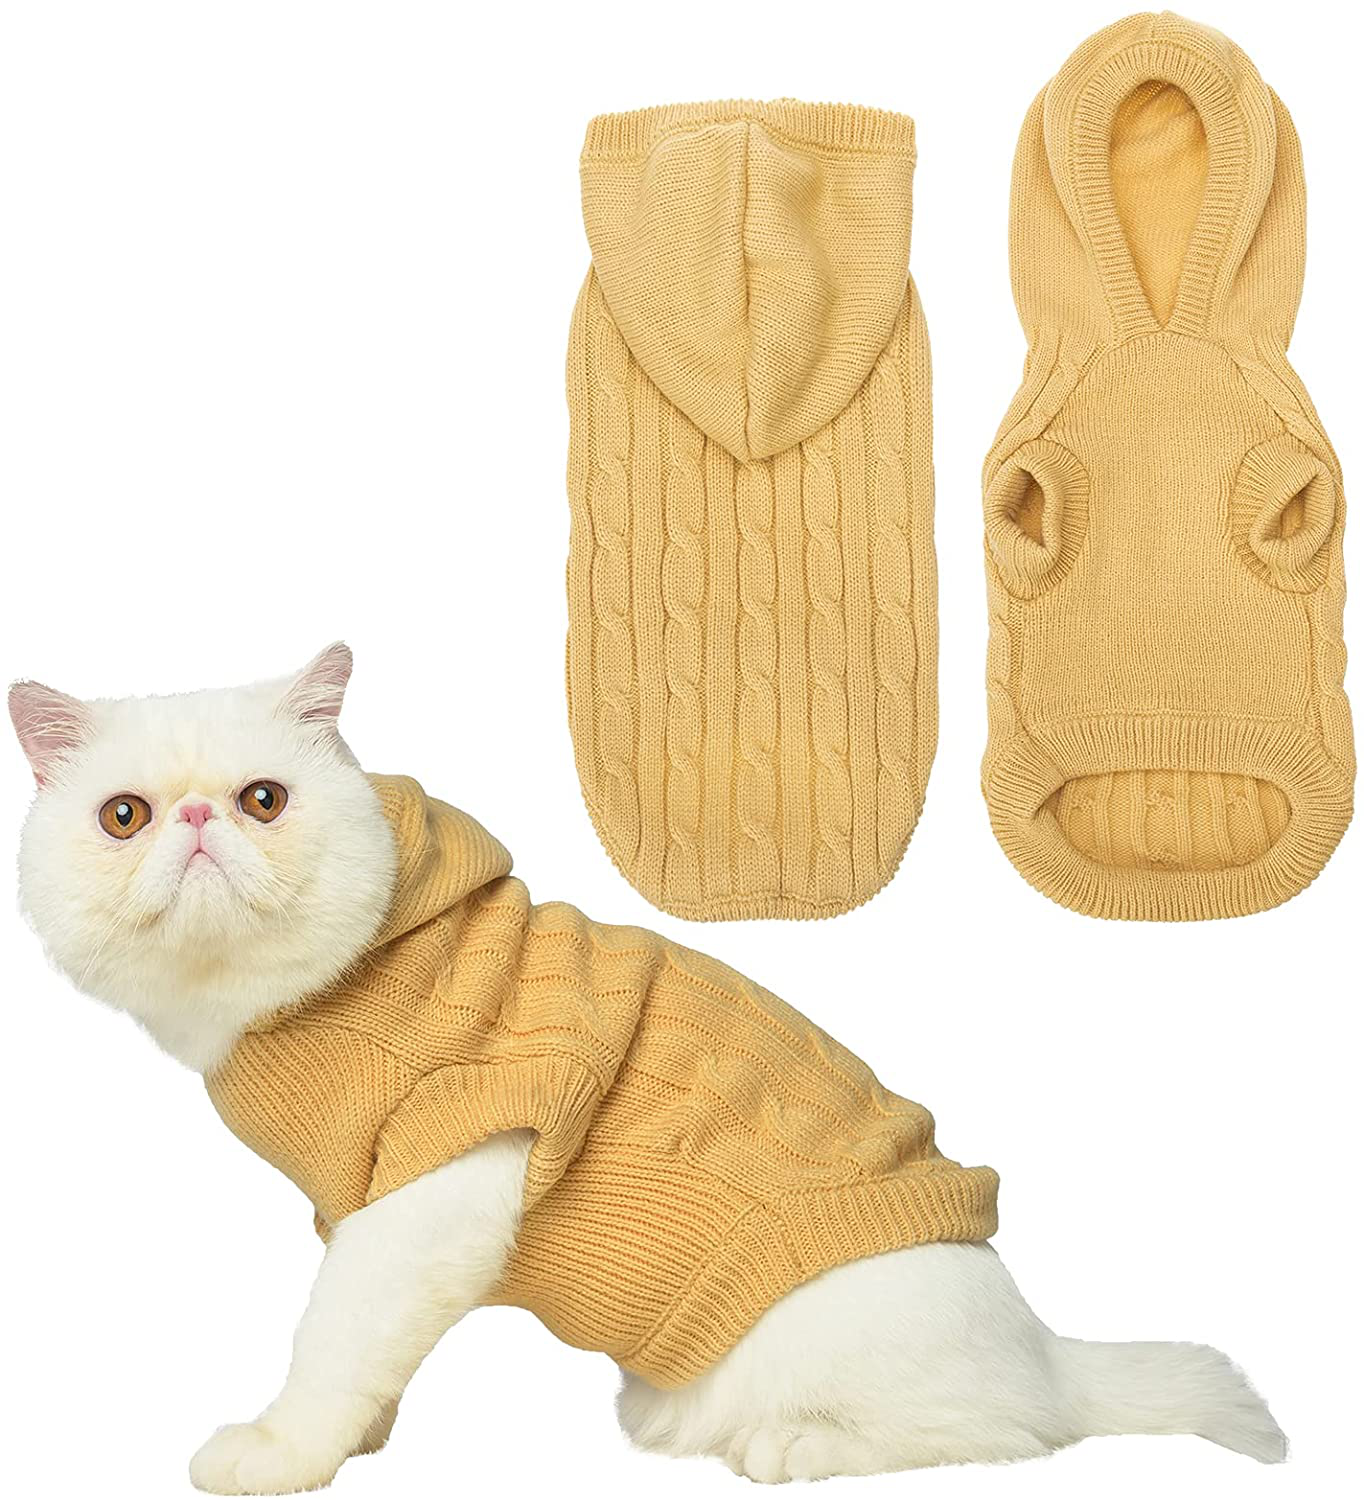 PUPTECK Winter Dog Cat Sweater Coat - Soft Cold Weather Clothes Knitwear for Kitties & Small Dogs Indoor Outdoor Walking Warm, Knitted Classic for Doggies Kitties Girls Boys Animals & Pet Supplies > Pet Supplies > Cat Supplies > Cat Apparel PUPTECK Cream S: Chest Girth 12”, Back Length 11.5” 